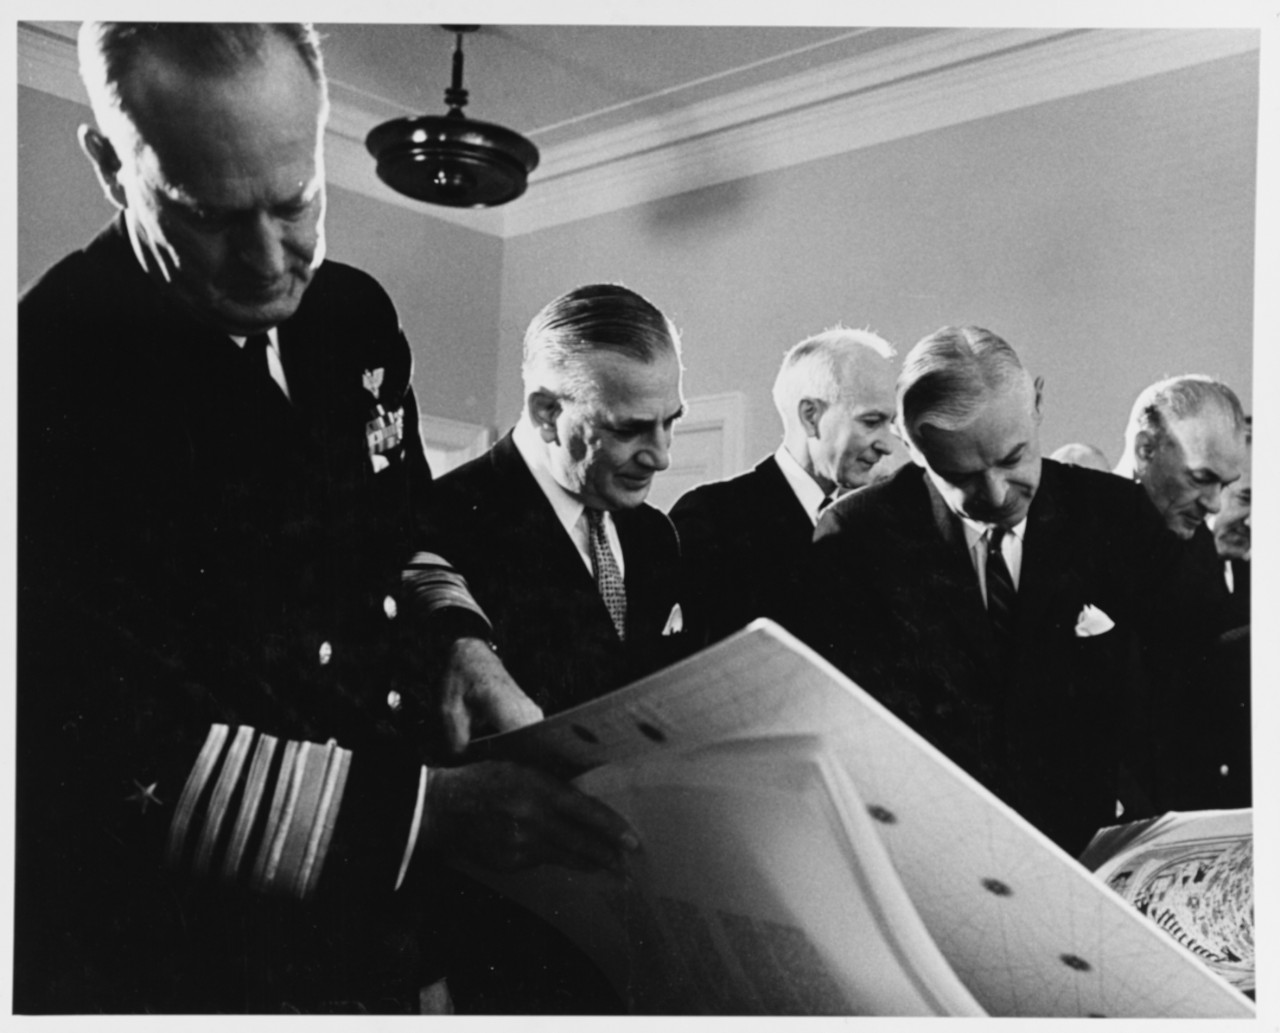 Chief of Naval operations Admiral David L. McDonald looks through Cartographic Book